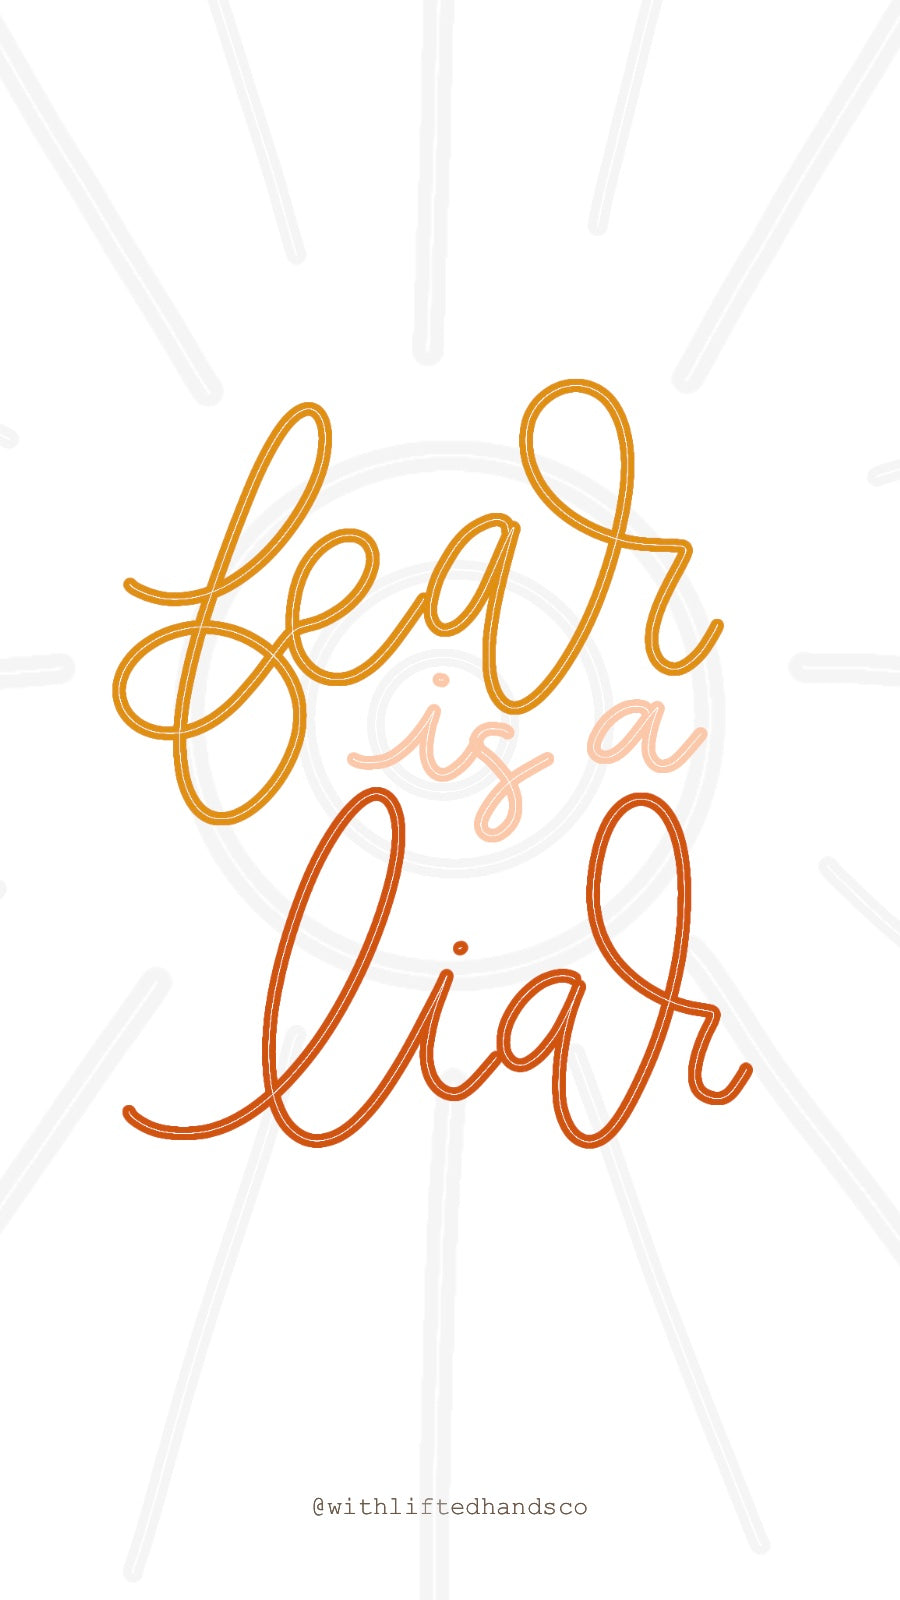 Fear is a liar Christian handlettered quote 